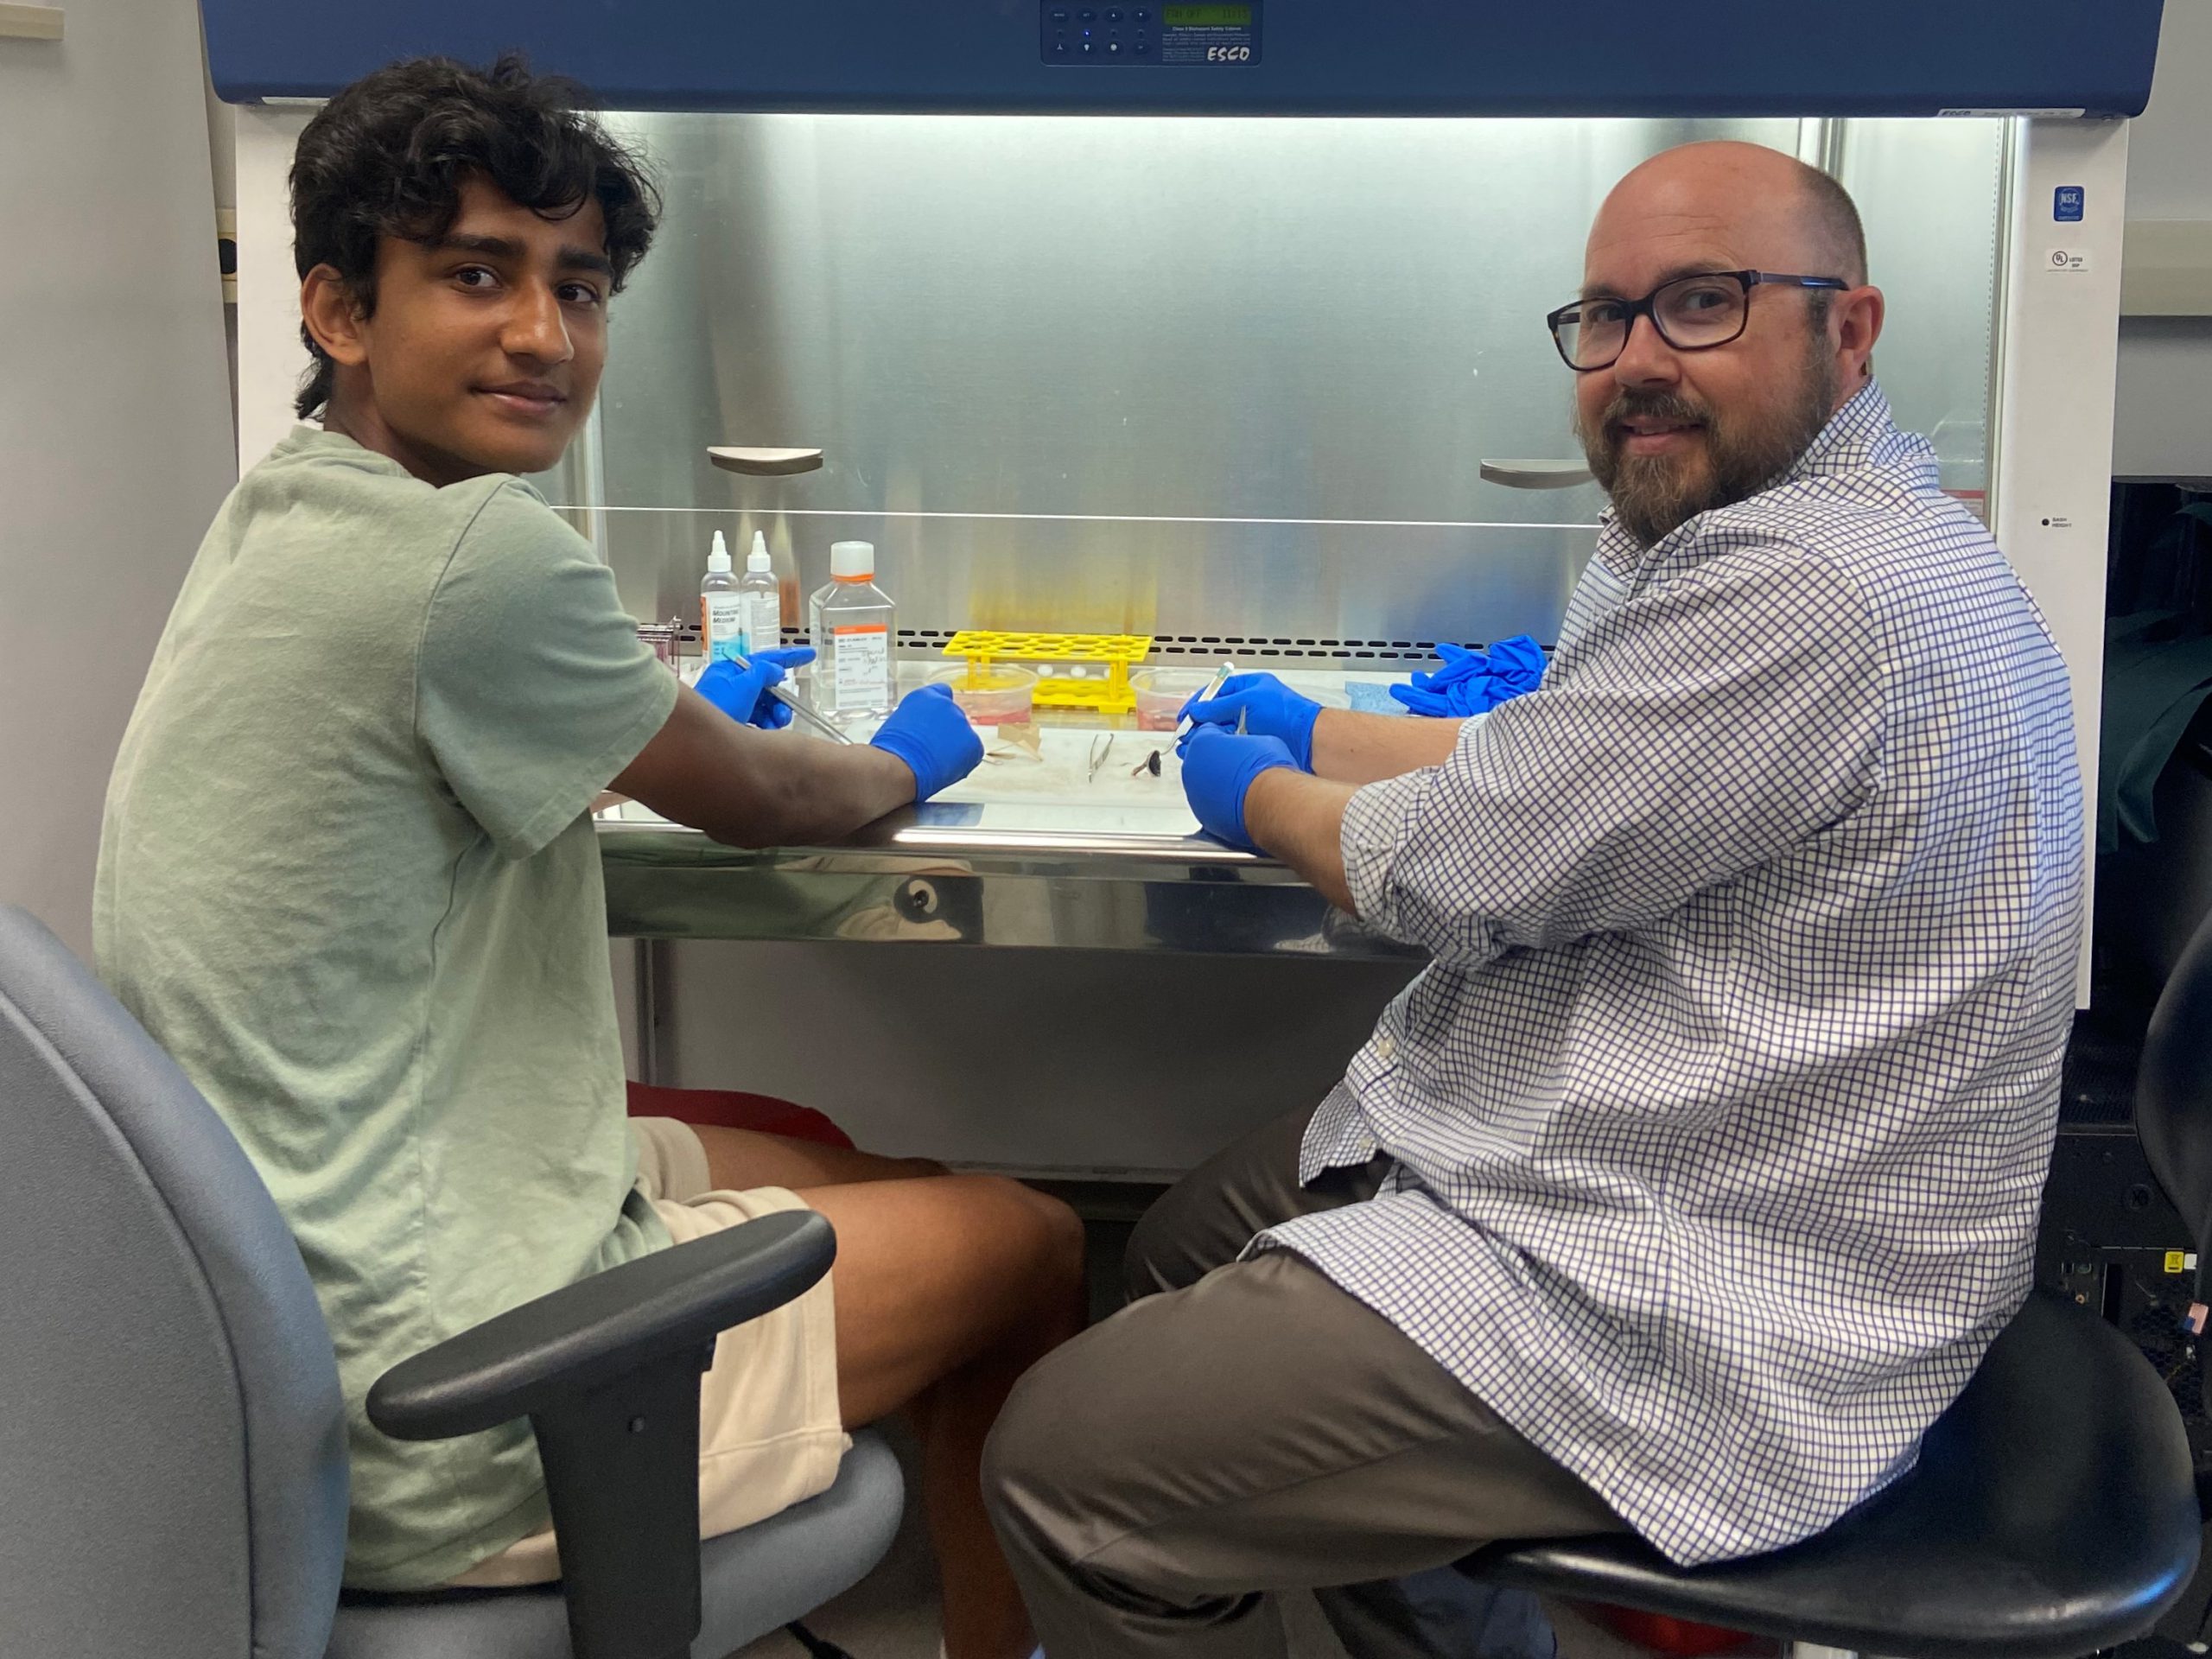 Student in Lab with Mentor